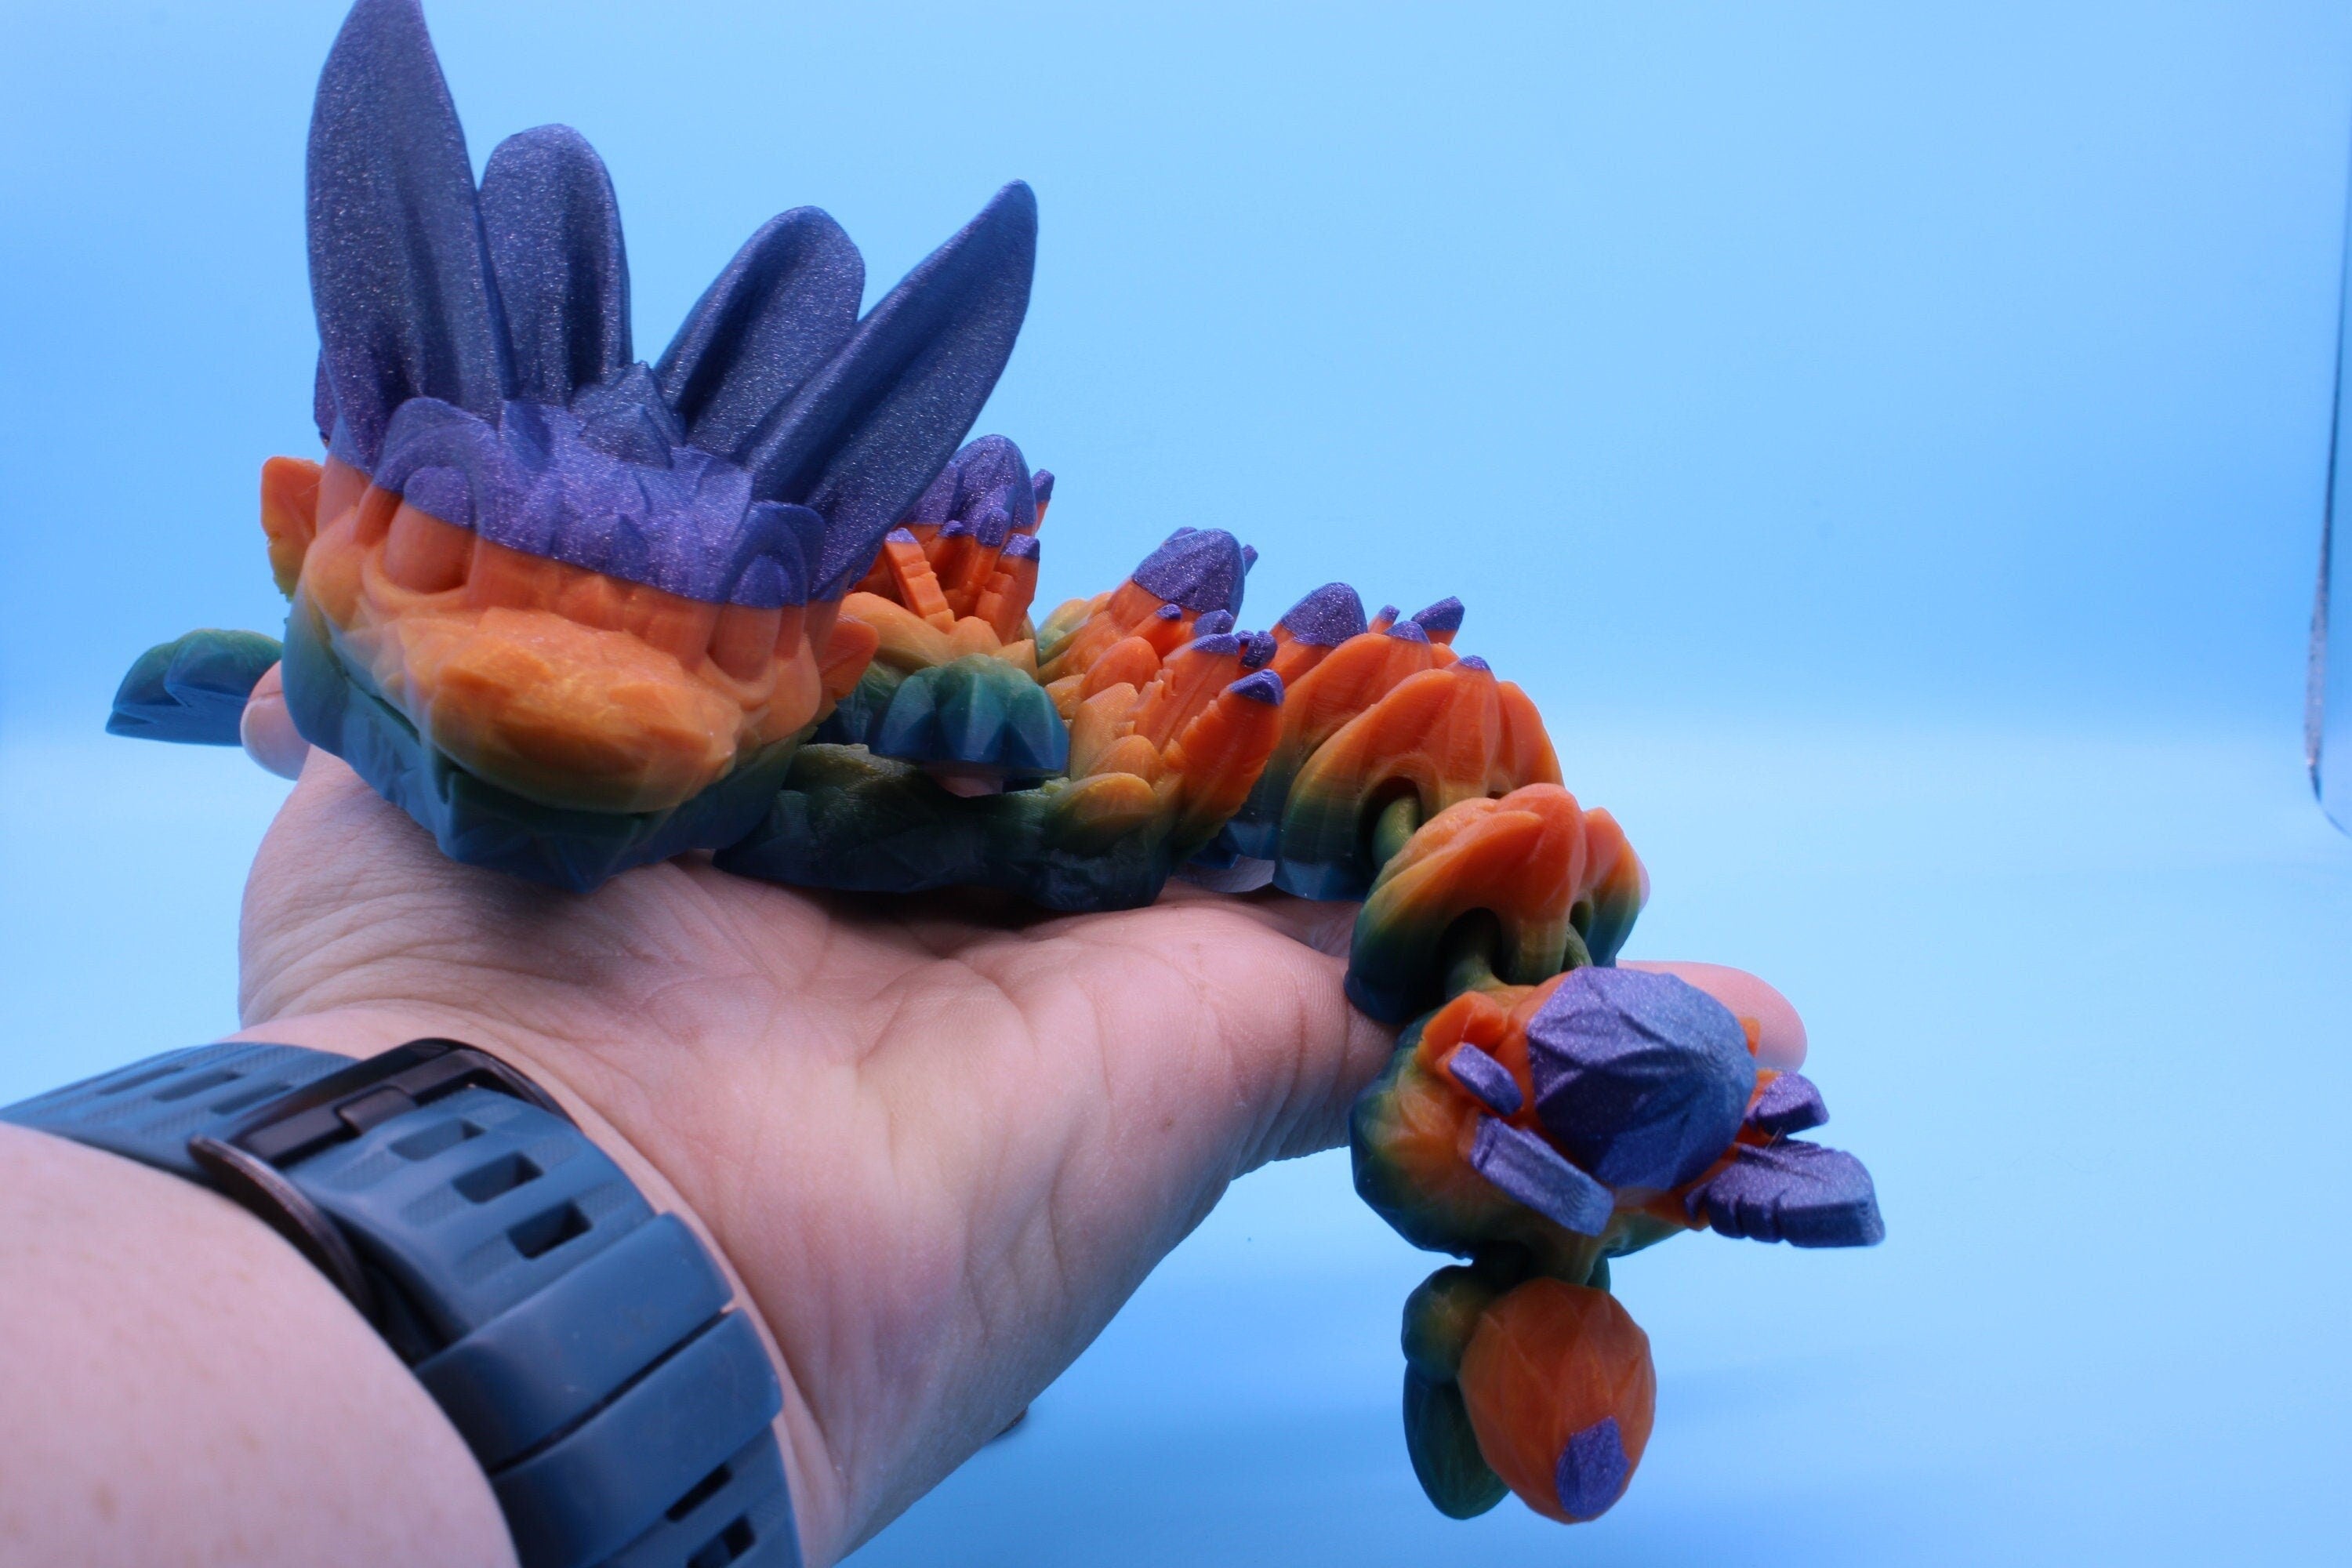 Easter Baby Dragon | Multi Color Rainbow | 3D Printed Articulating Dragon | Flexi Toy | Adult Fidget Toy | Dragon Buddy ready for you! 12 in